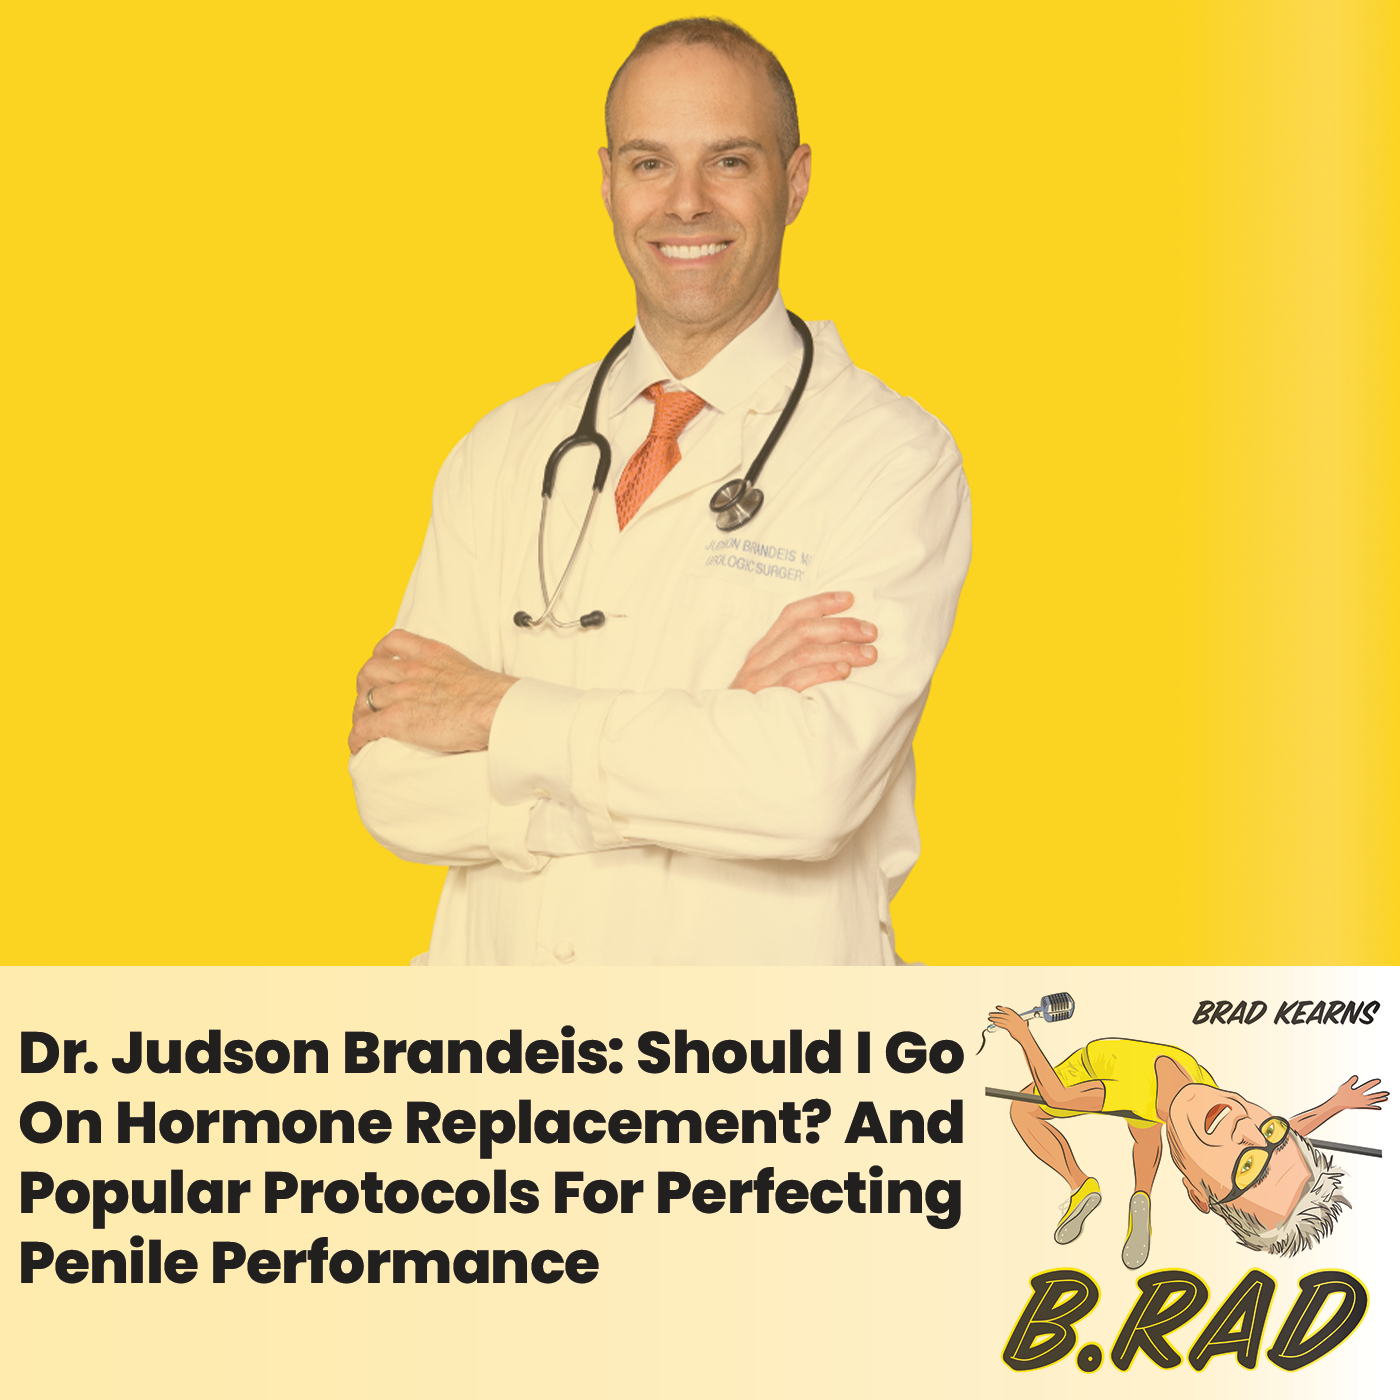 Dr. Judson Brandeis: Should I Go On Hormone Replacement? And Popular Protocols For Perfecting Penile Performance